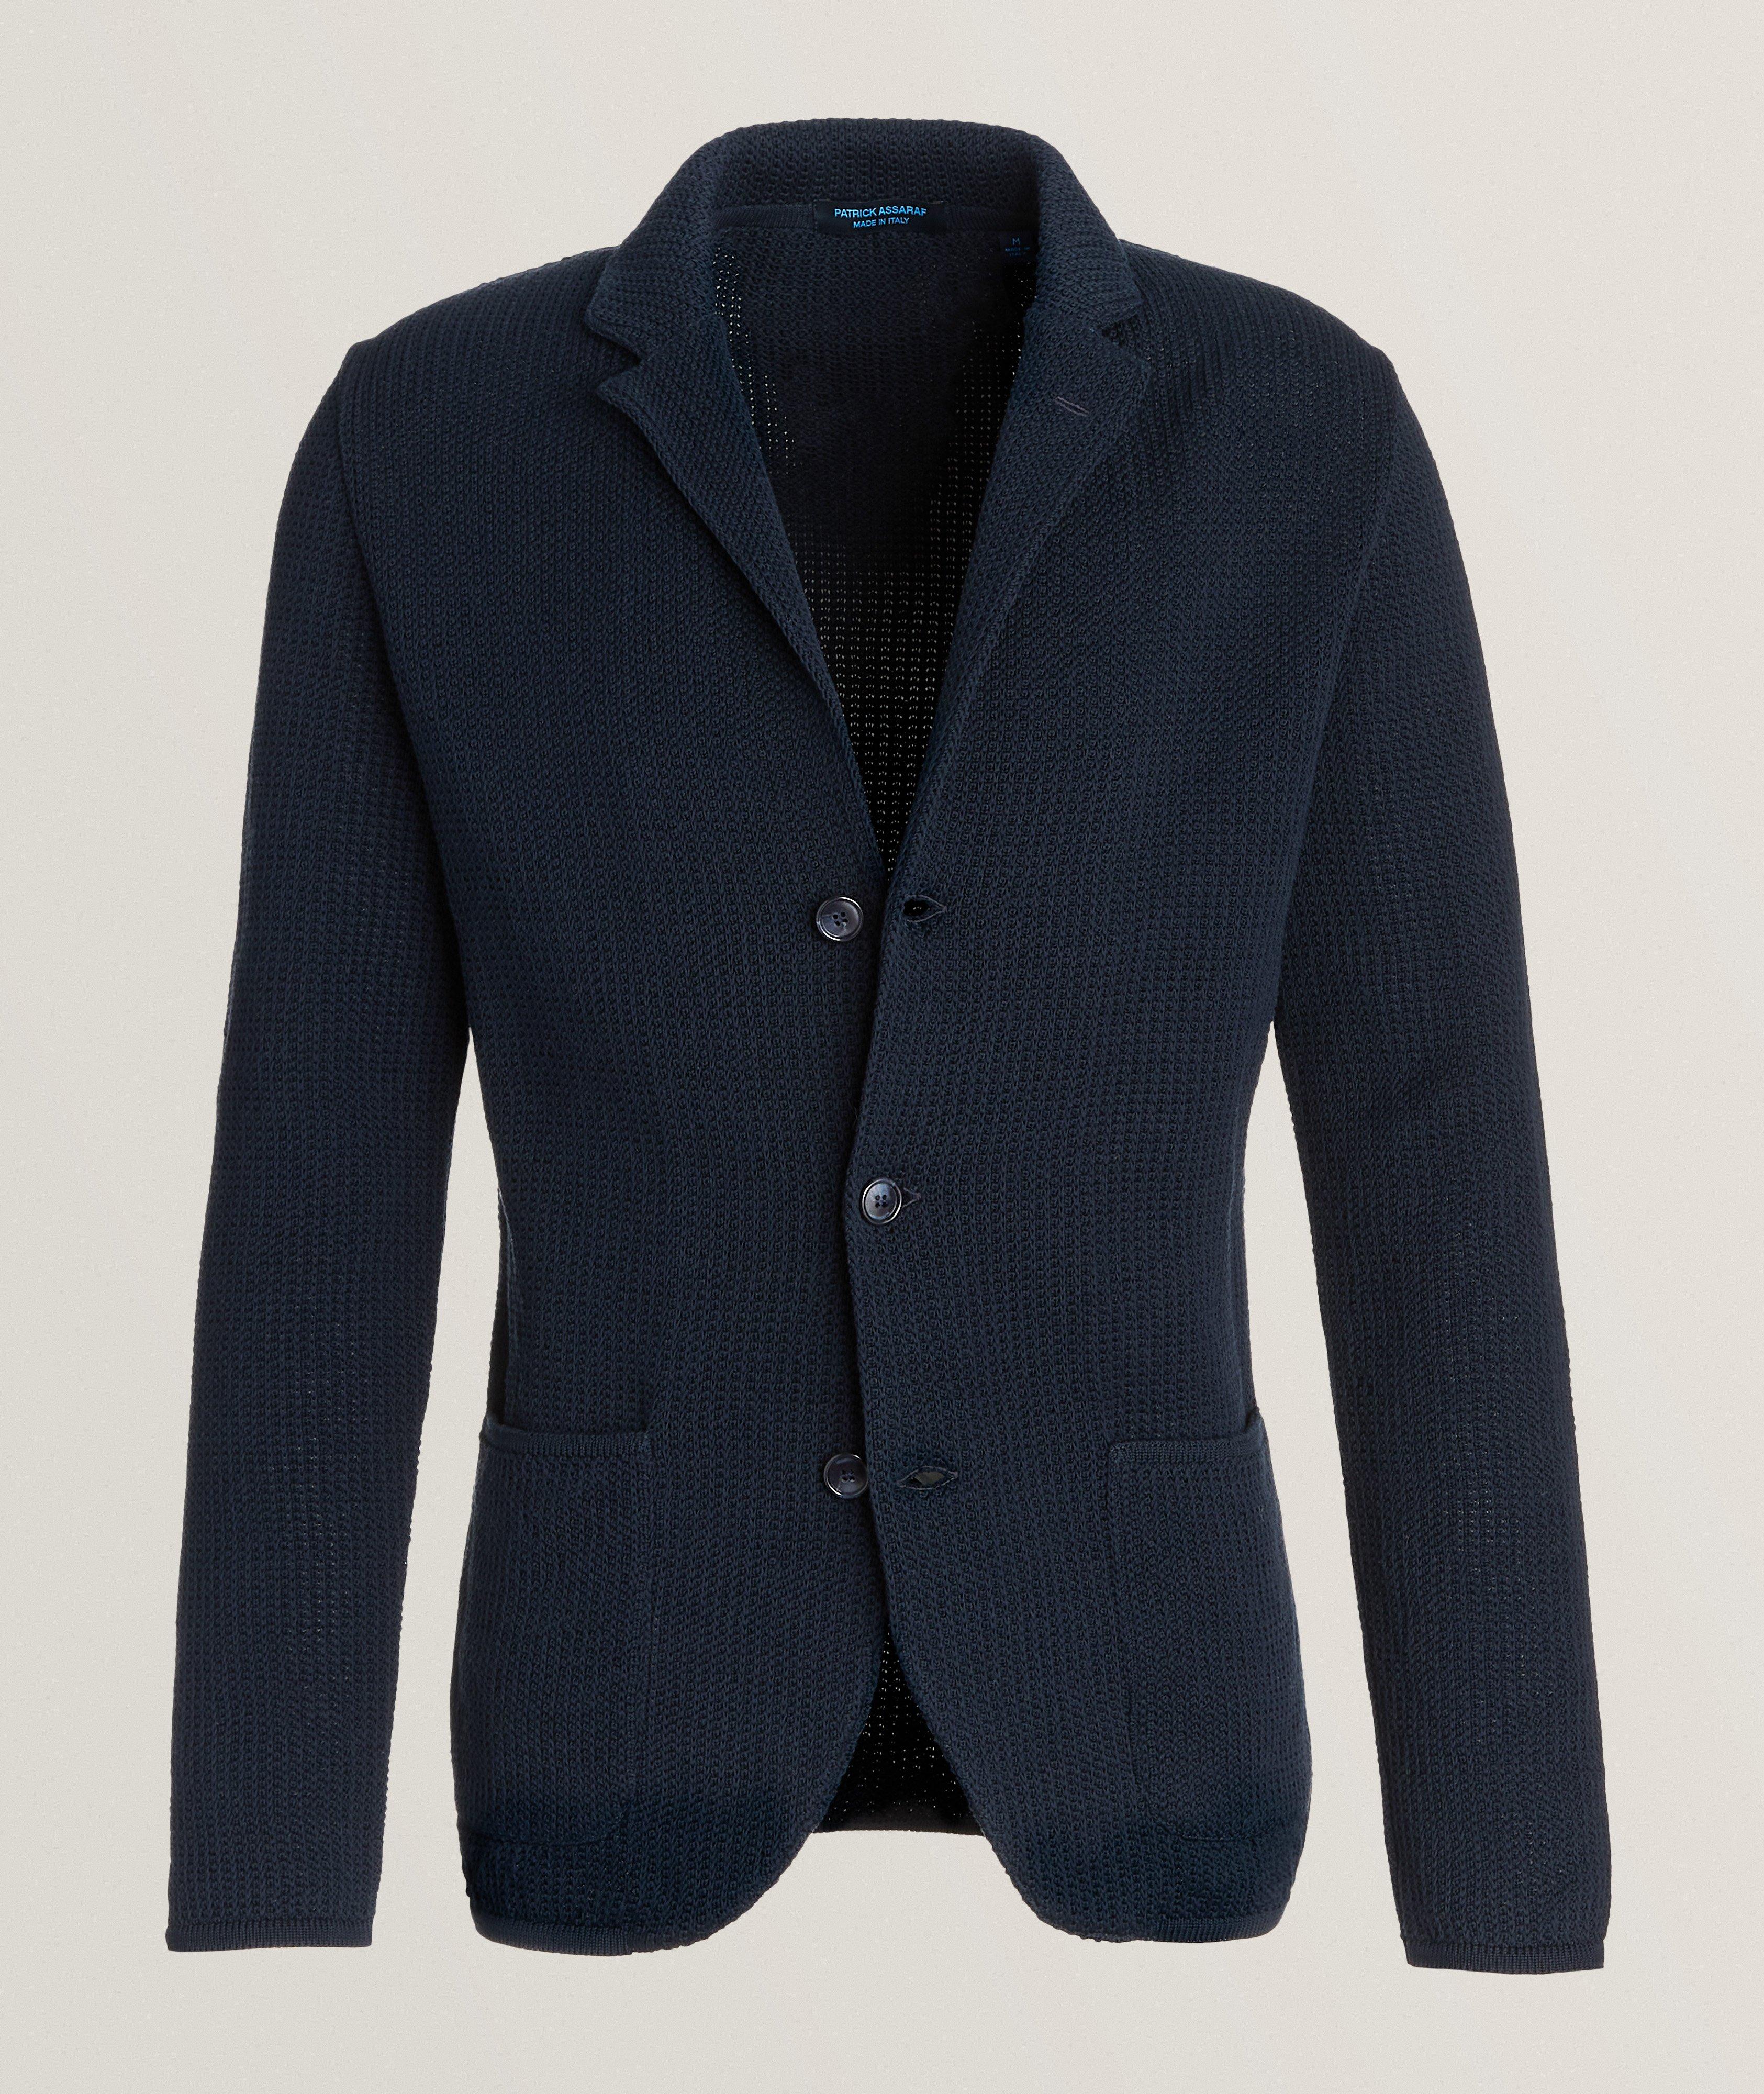 Cotton Knitted Sport Jacket image 0